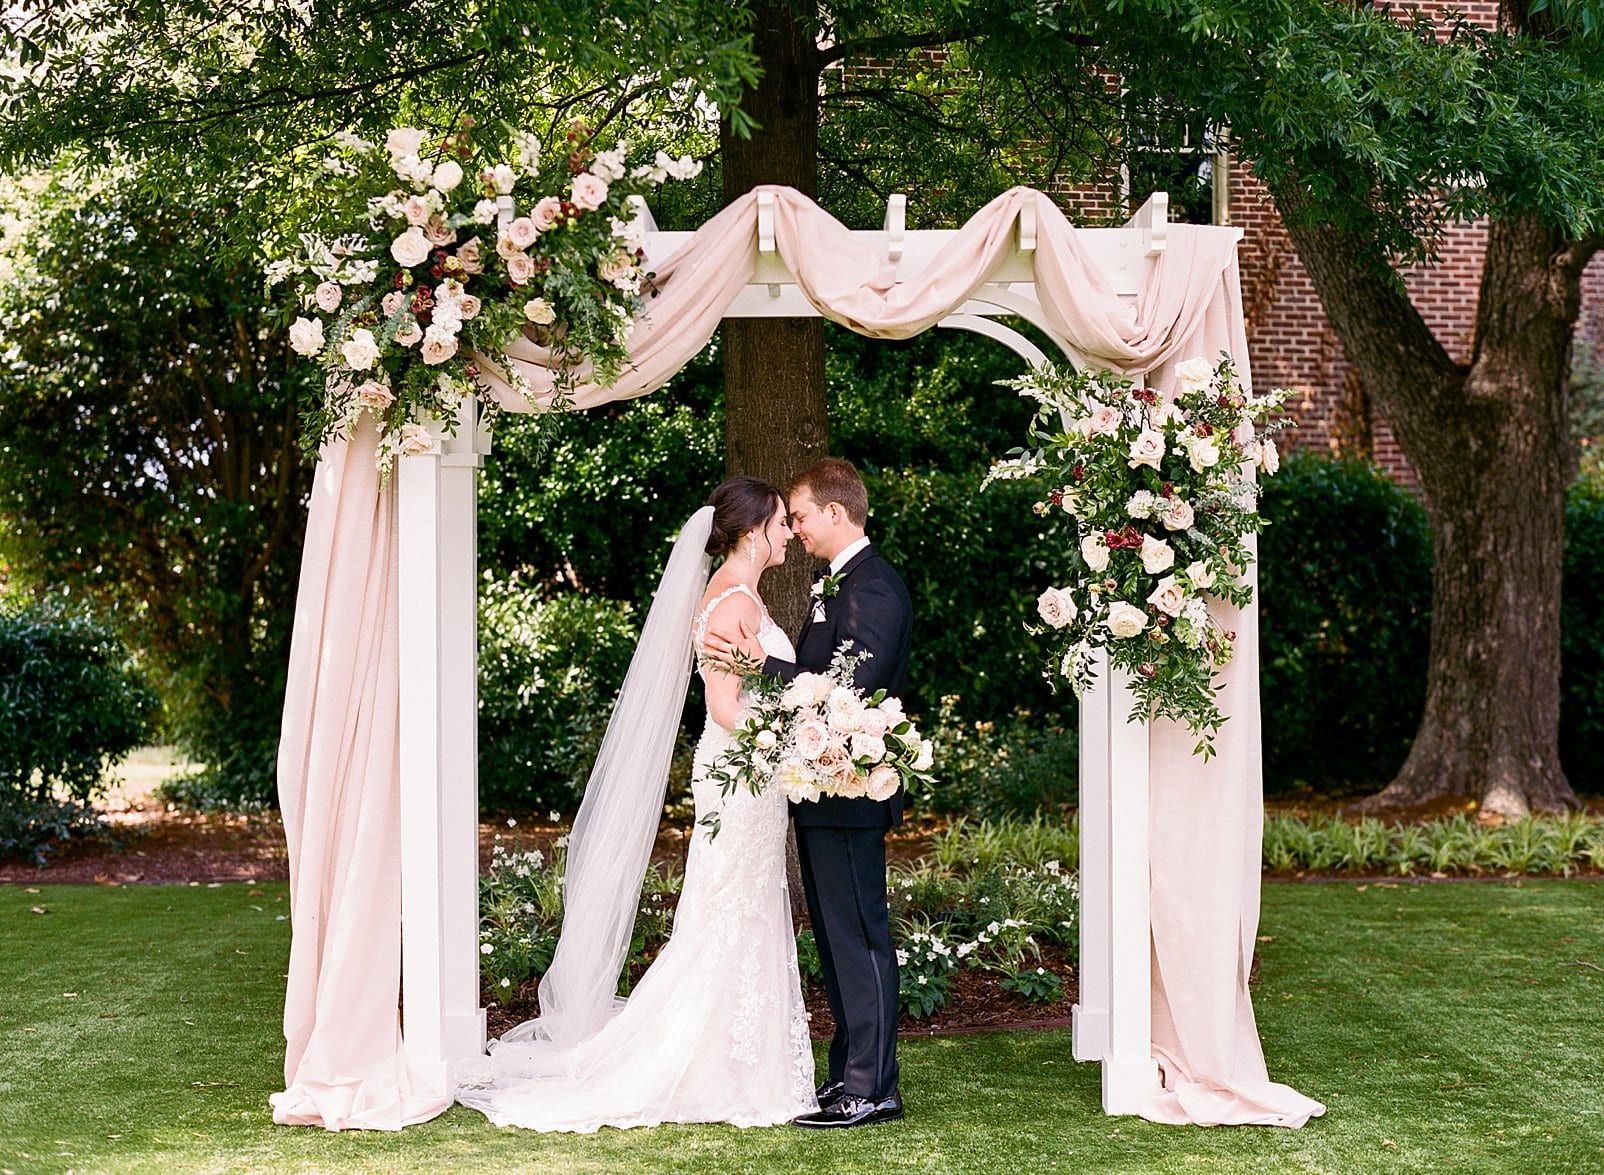 Merrimon Wynne bride and groom under the arbor at the ceremony sit. Arbor is draped with a long cloth and floral installments at the corners photo